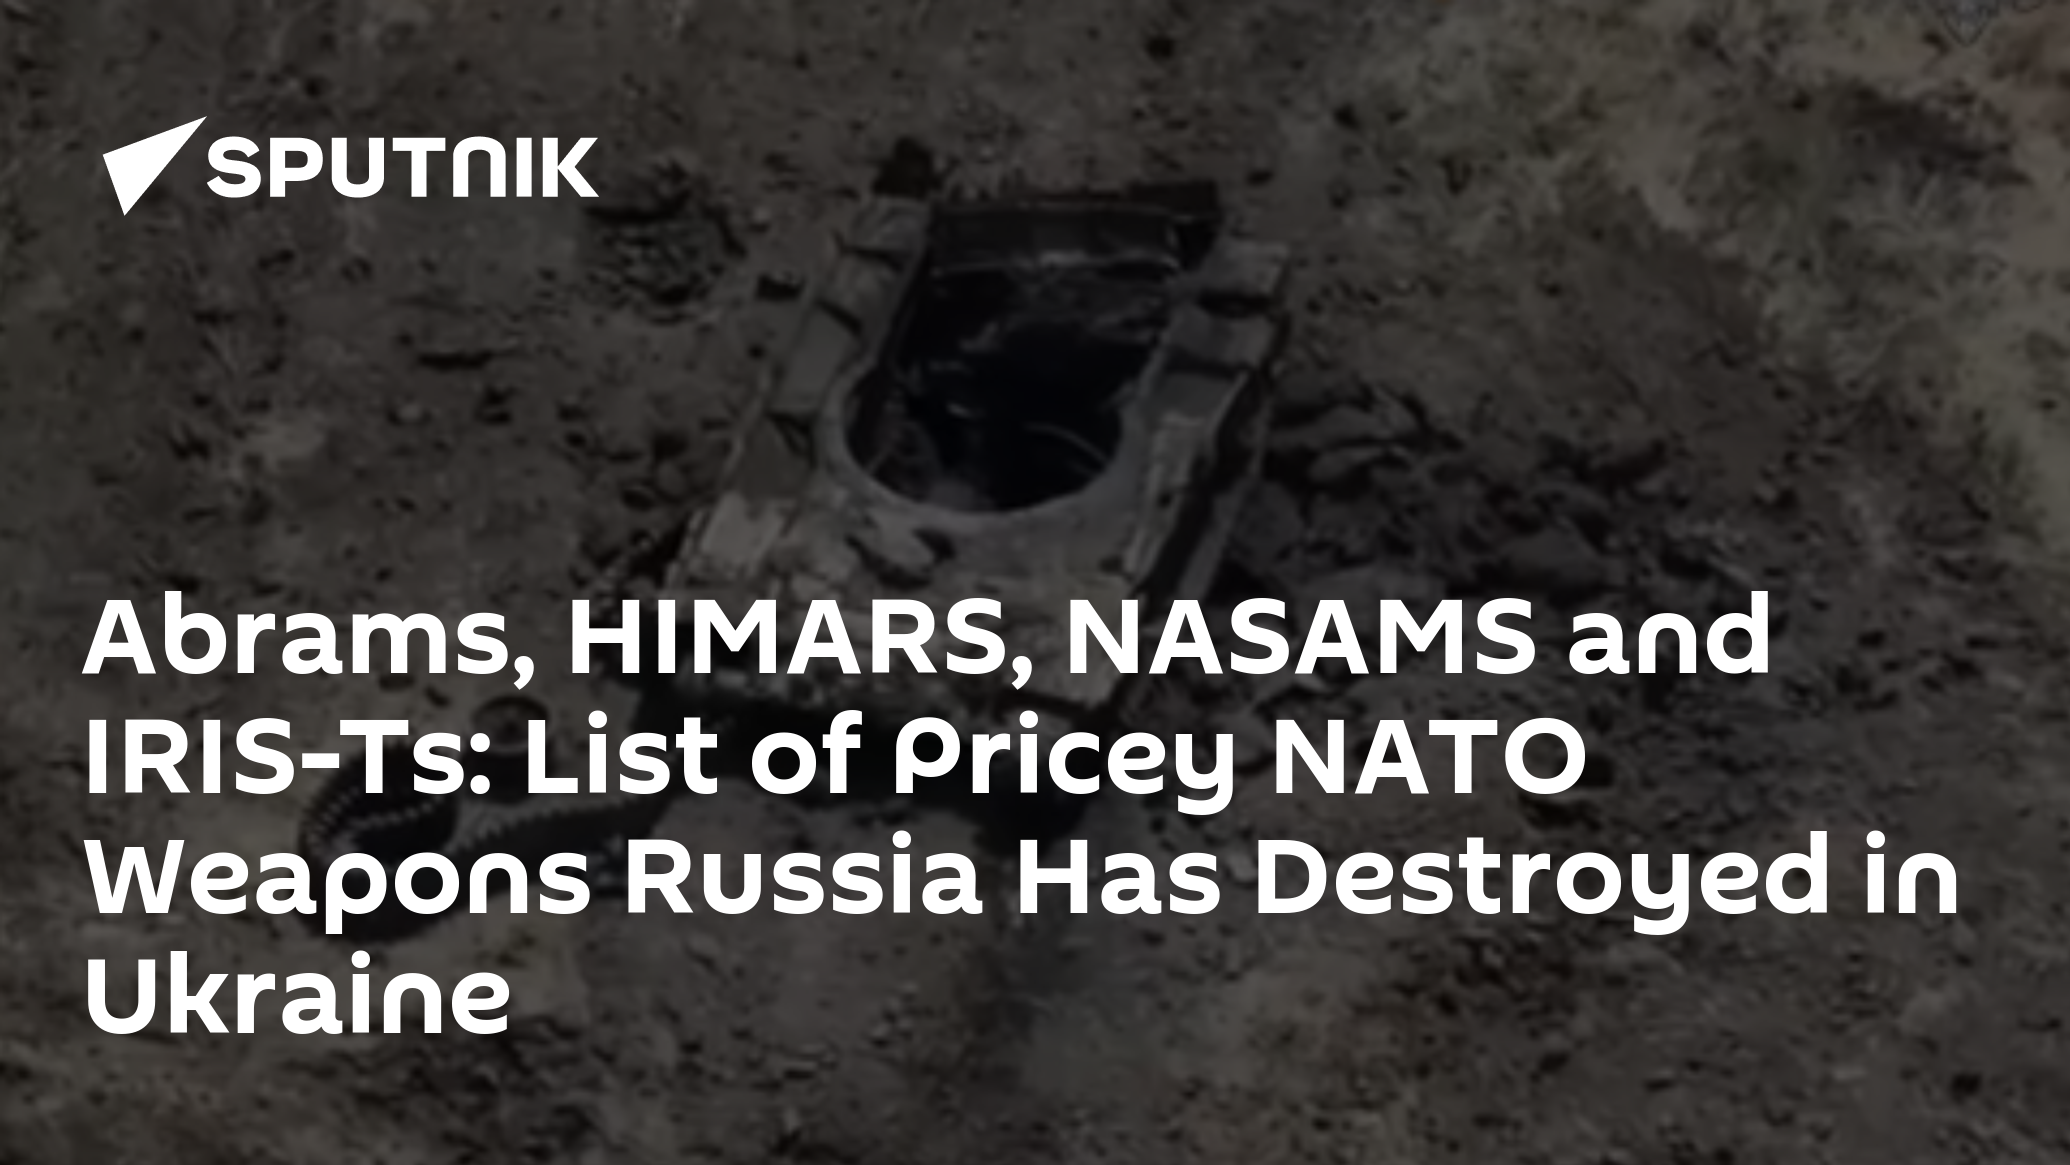 Abrams, HIMARS, NASAMS and IRIS-Ts: List of Pricey NATO Weapons Russia Has Destroyed in Ukraine